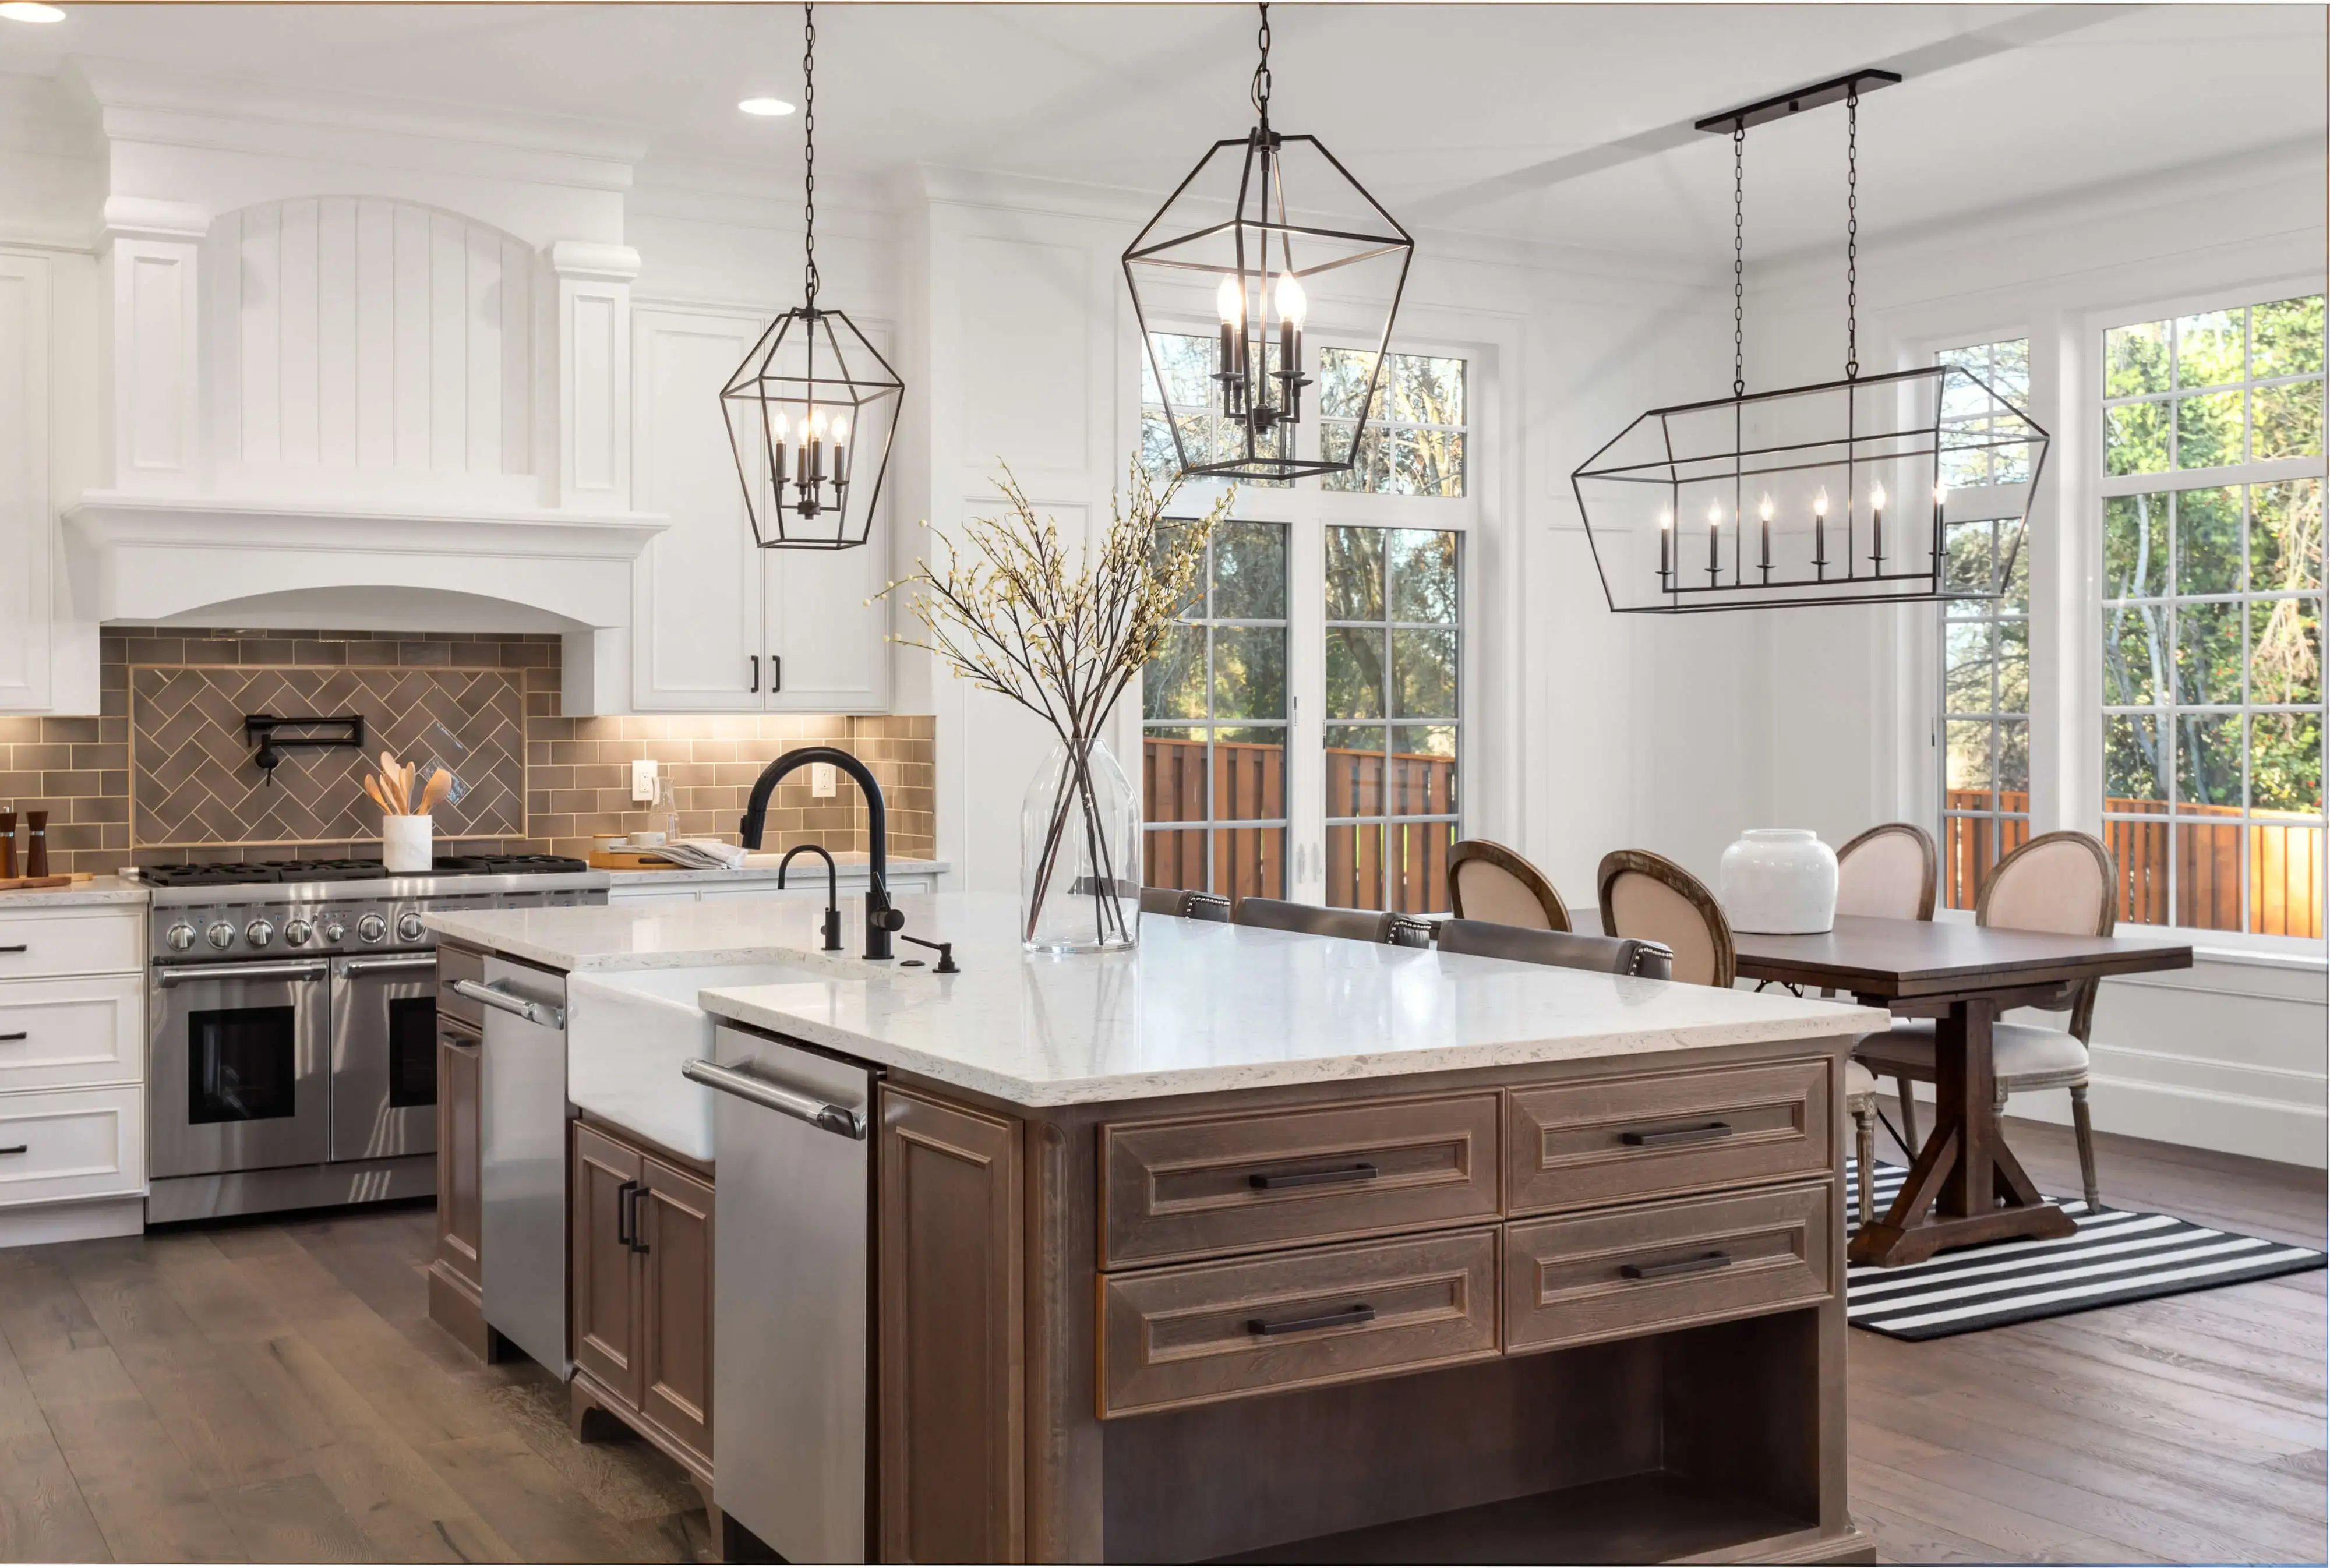 Modern kitchen remodel in Philadelphia featuring a large island, stainless steel appliances, and elegant pendant lighting